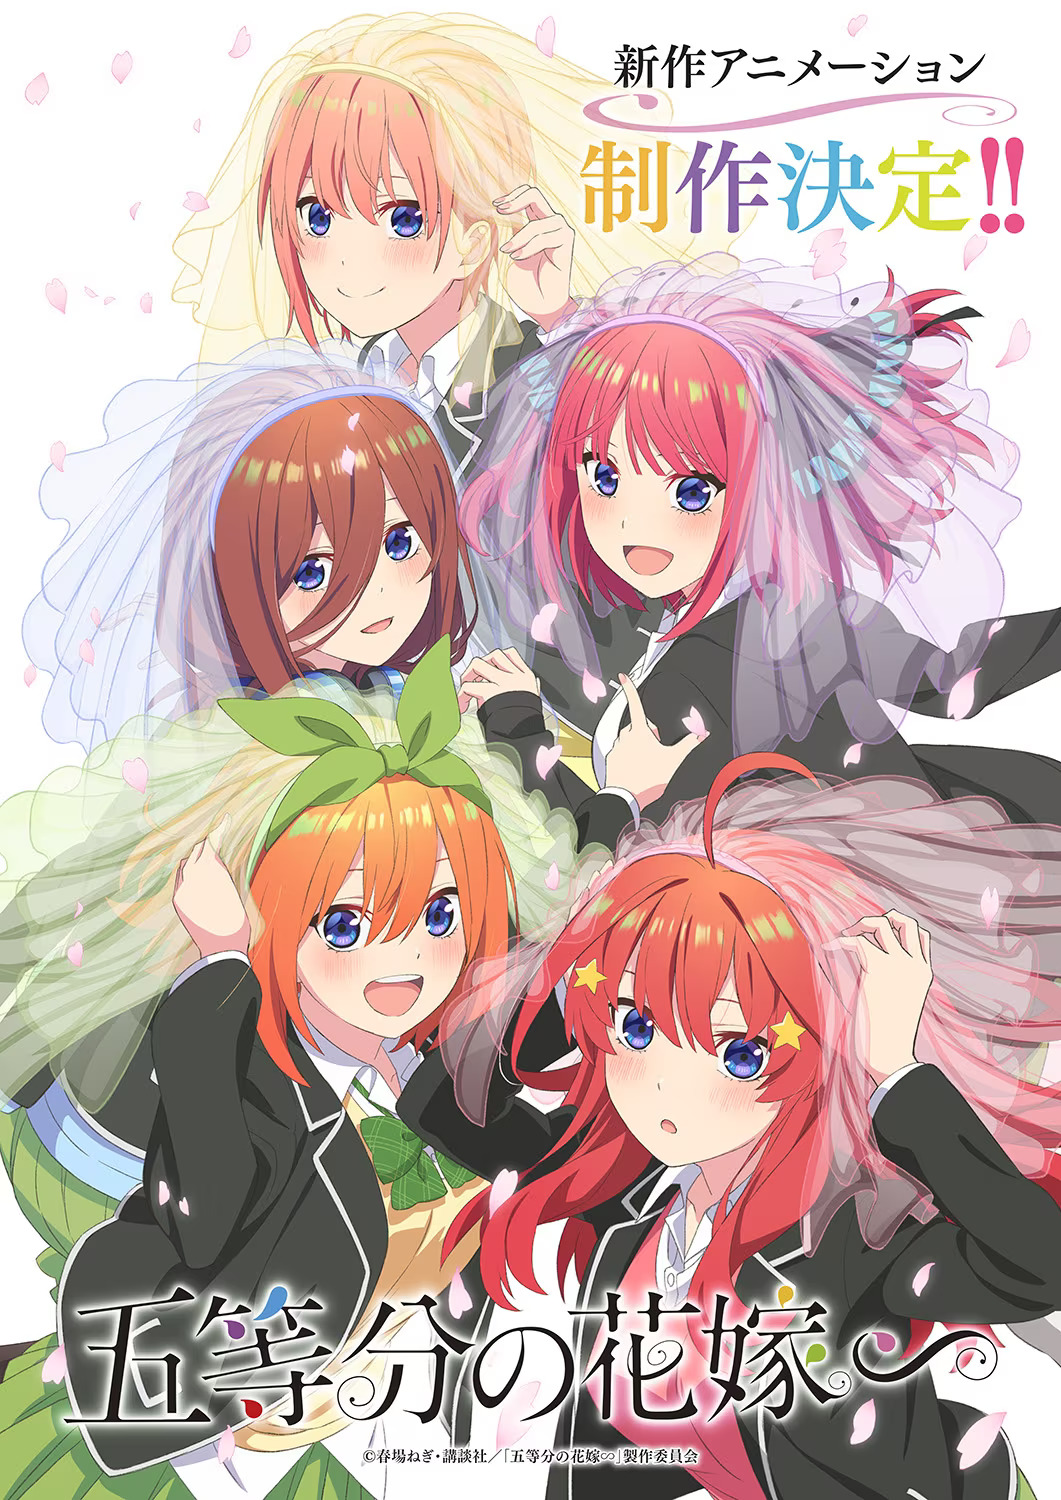 relationship New Side Story Anime for The Quintessential Quintuplets Announced!